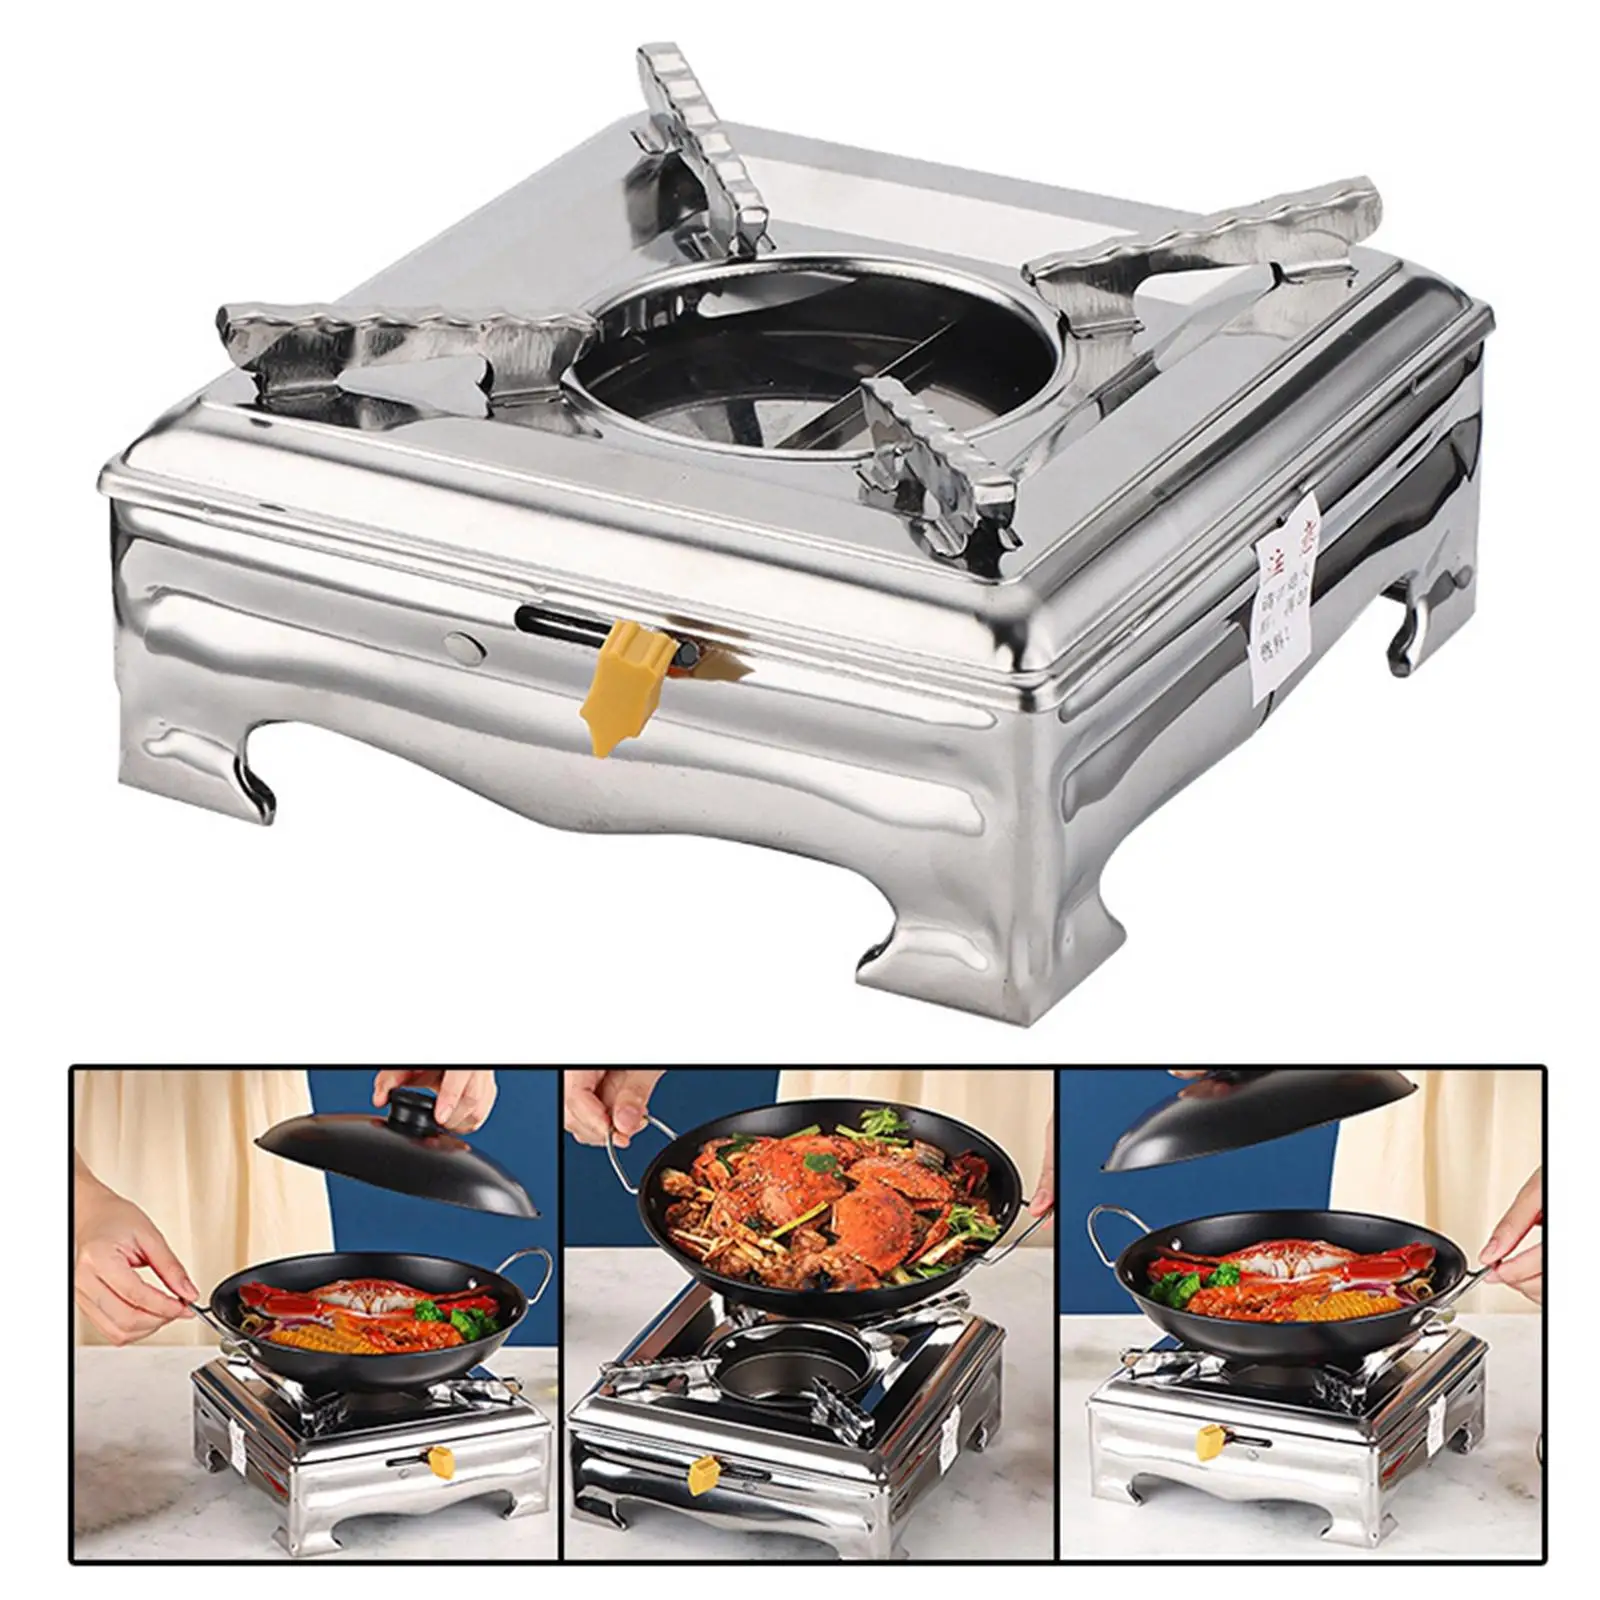 Alcohol Stove with Lid with Cover Environmental Protection Lightweight Burner